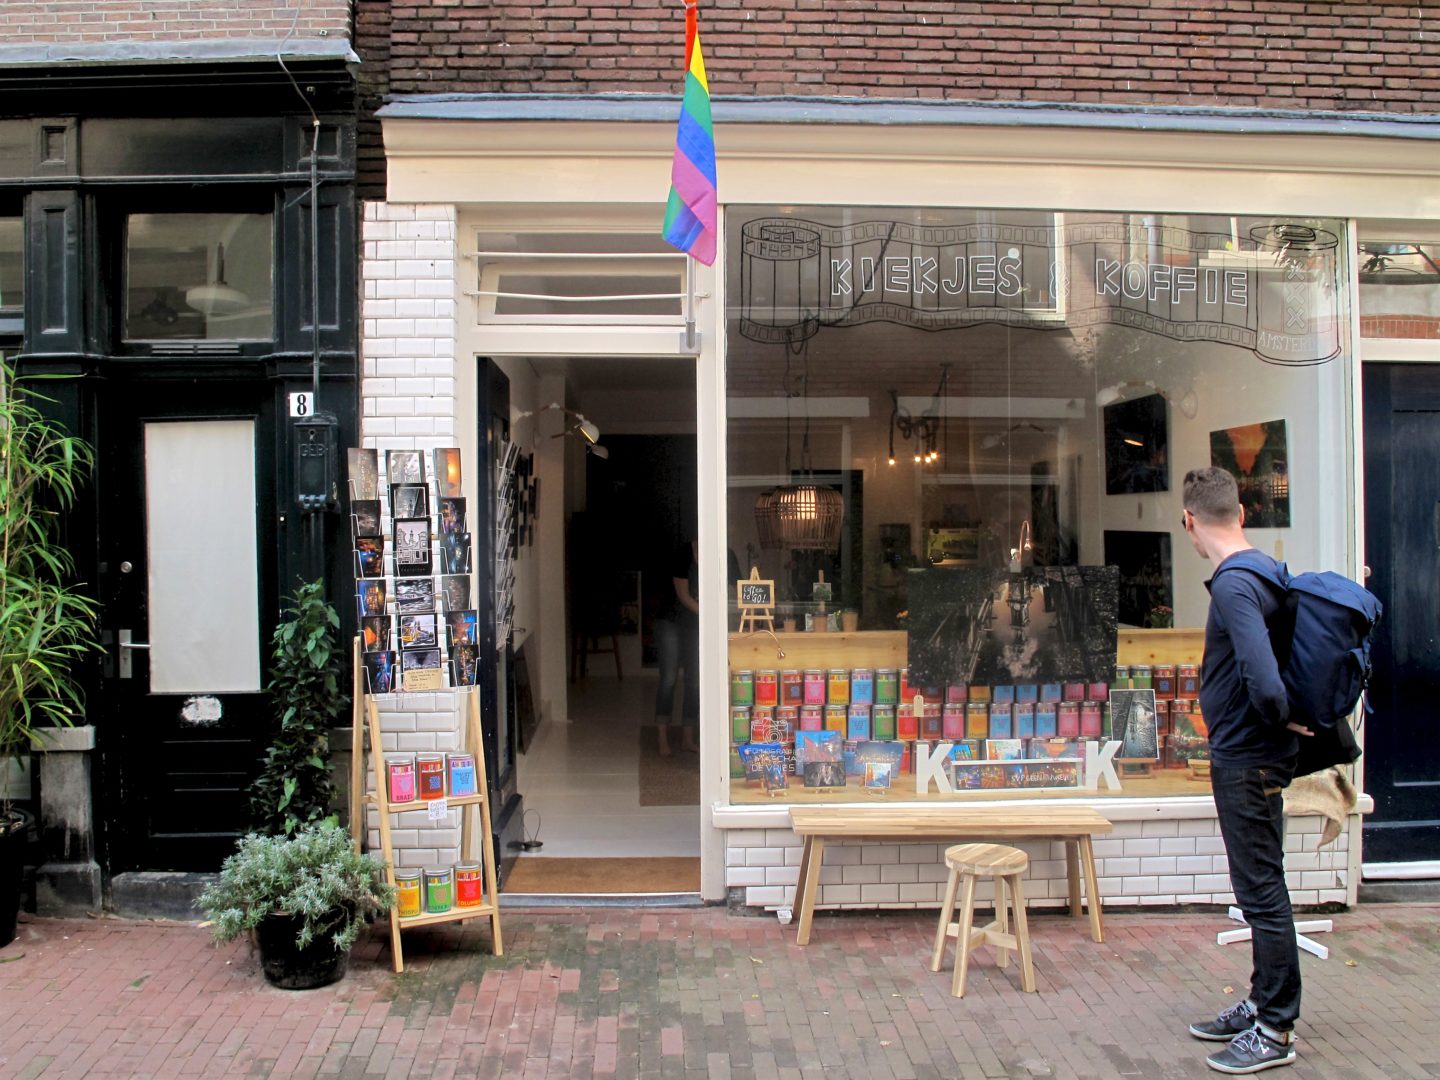 LGBTQ+ guide to Amsterdam: What to see and do